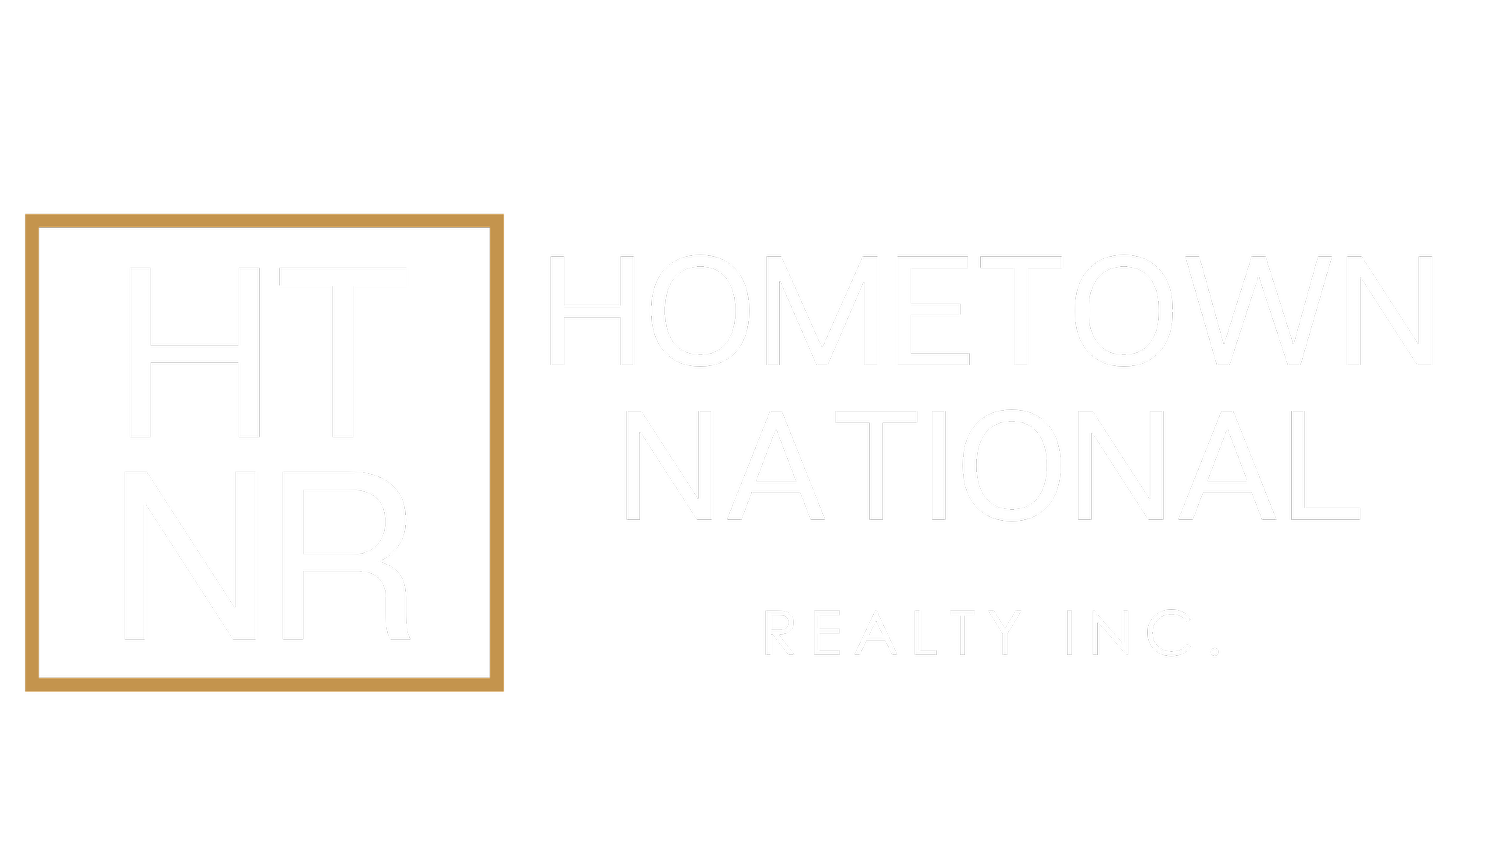 Hometown National Realty